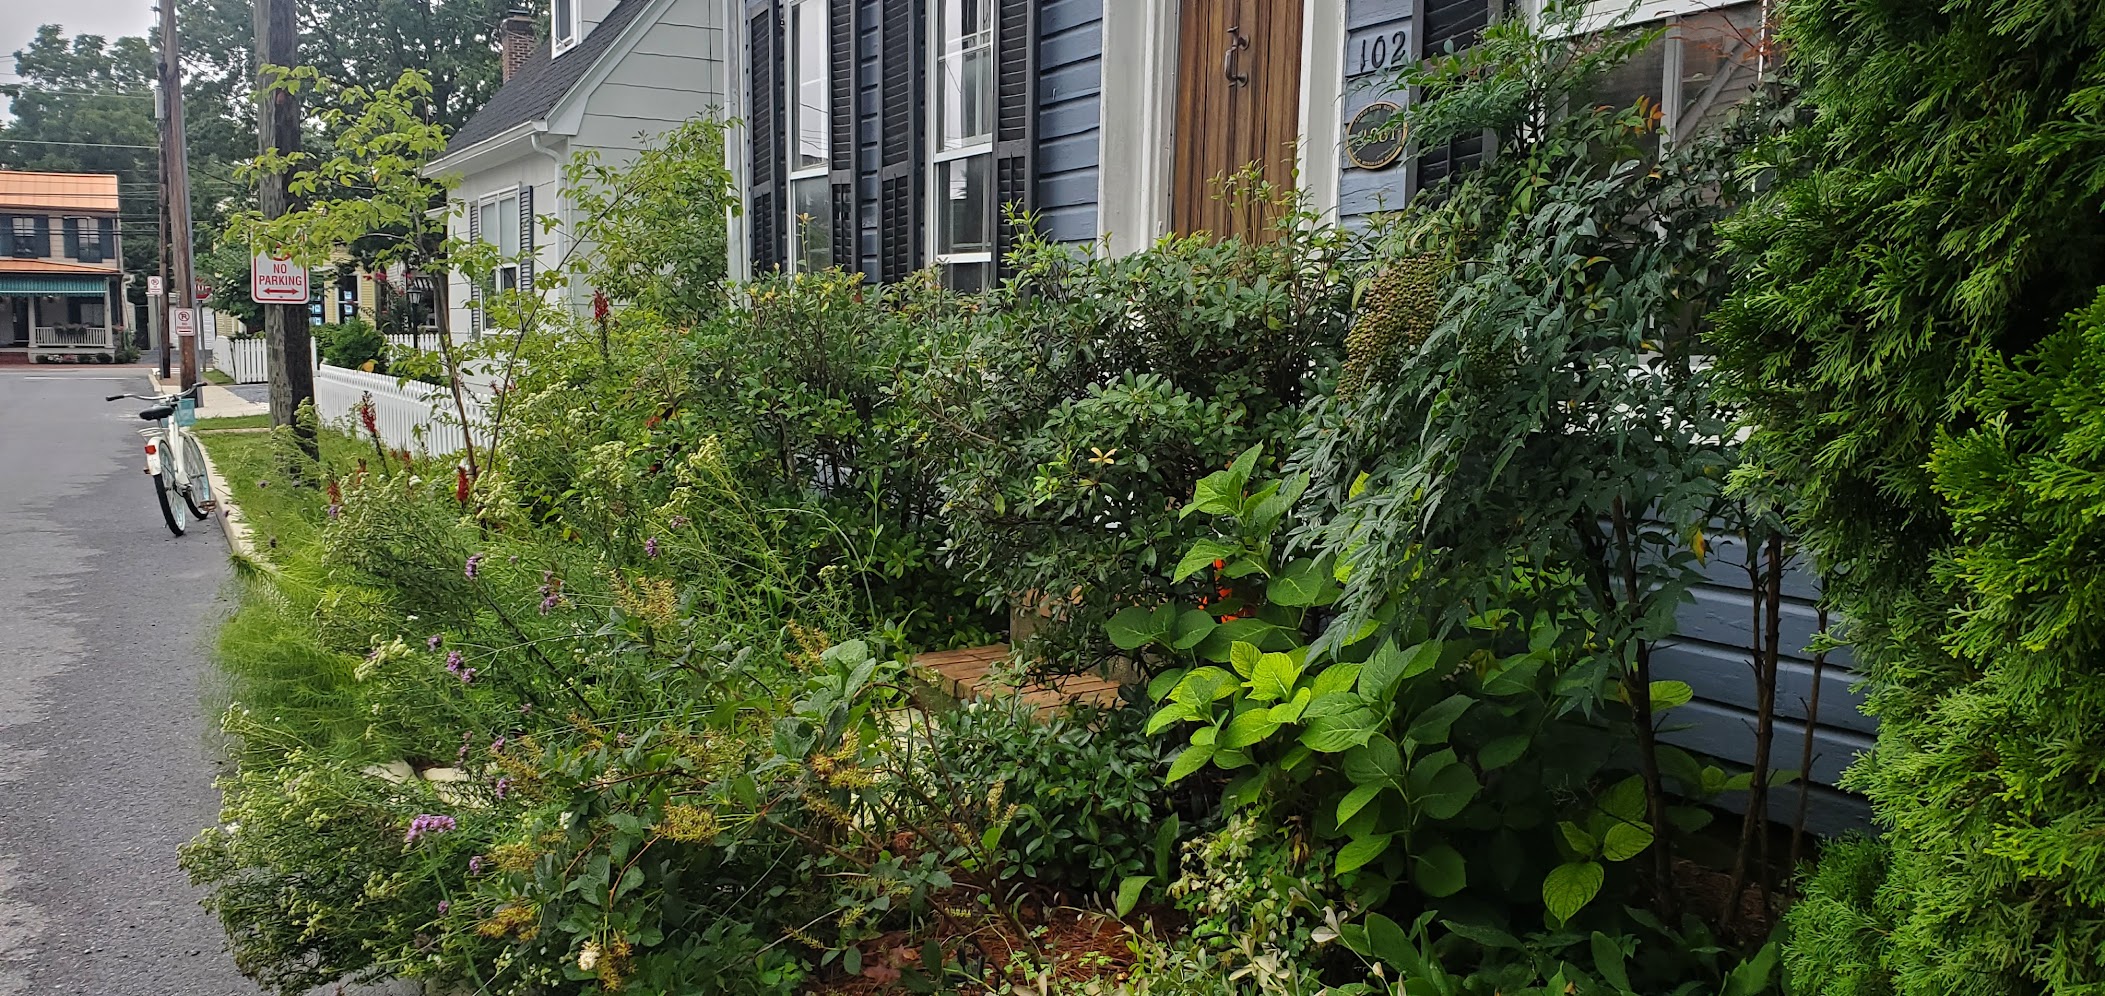 Diverse plantings thrive along a narrow strip of land between a house and the street, exemplifying the possibilities of gardening in small, developed spaces.